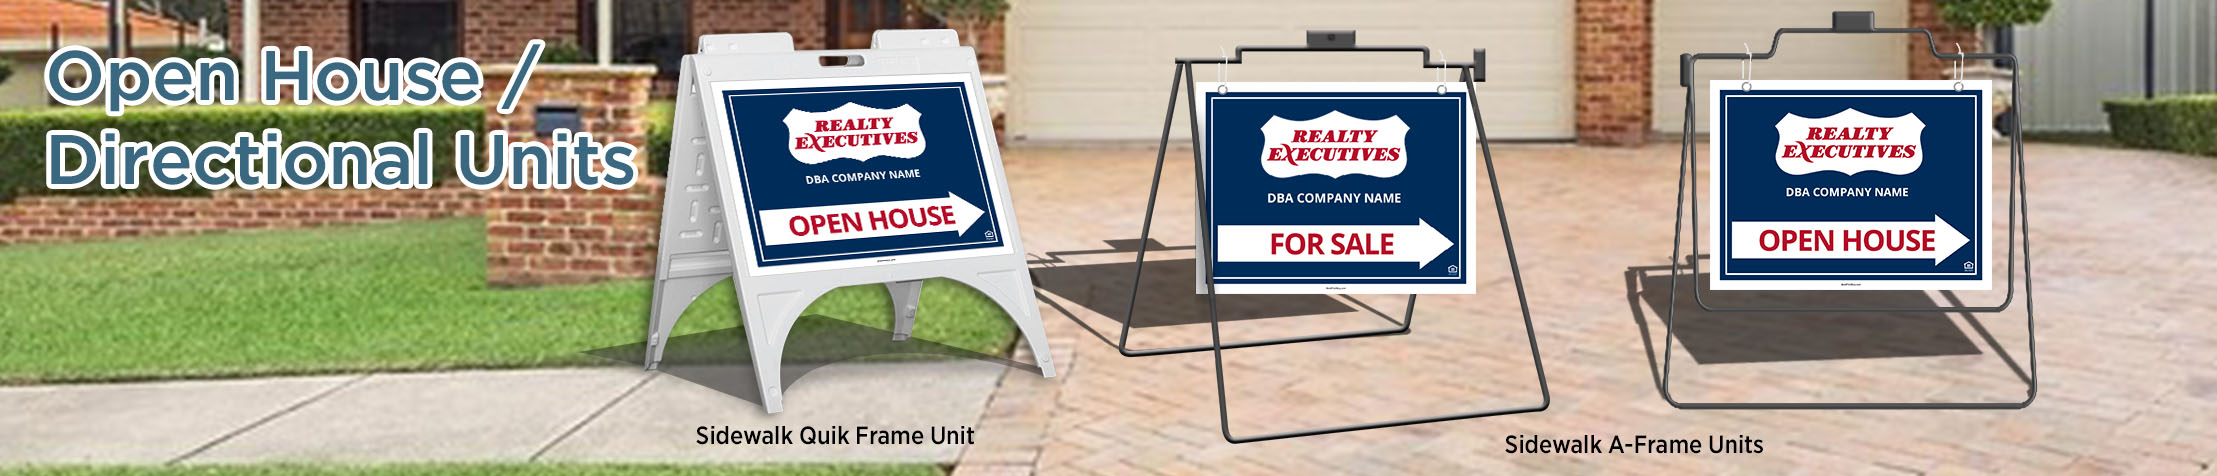 Realty Executives Real Estate Open House/Directional Units - Realty Executives real estate Sidewalk A-Frame signs | BestPrintBuy.com